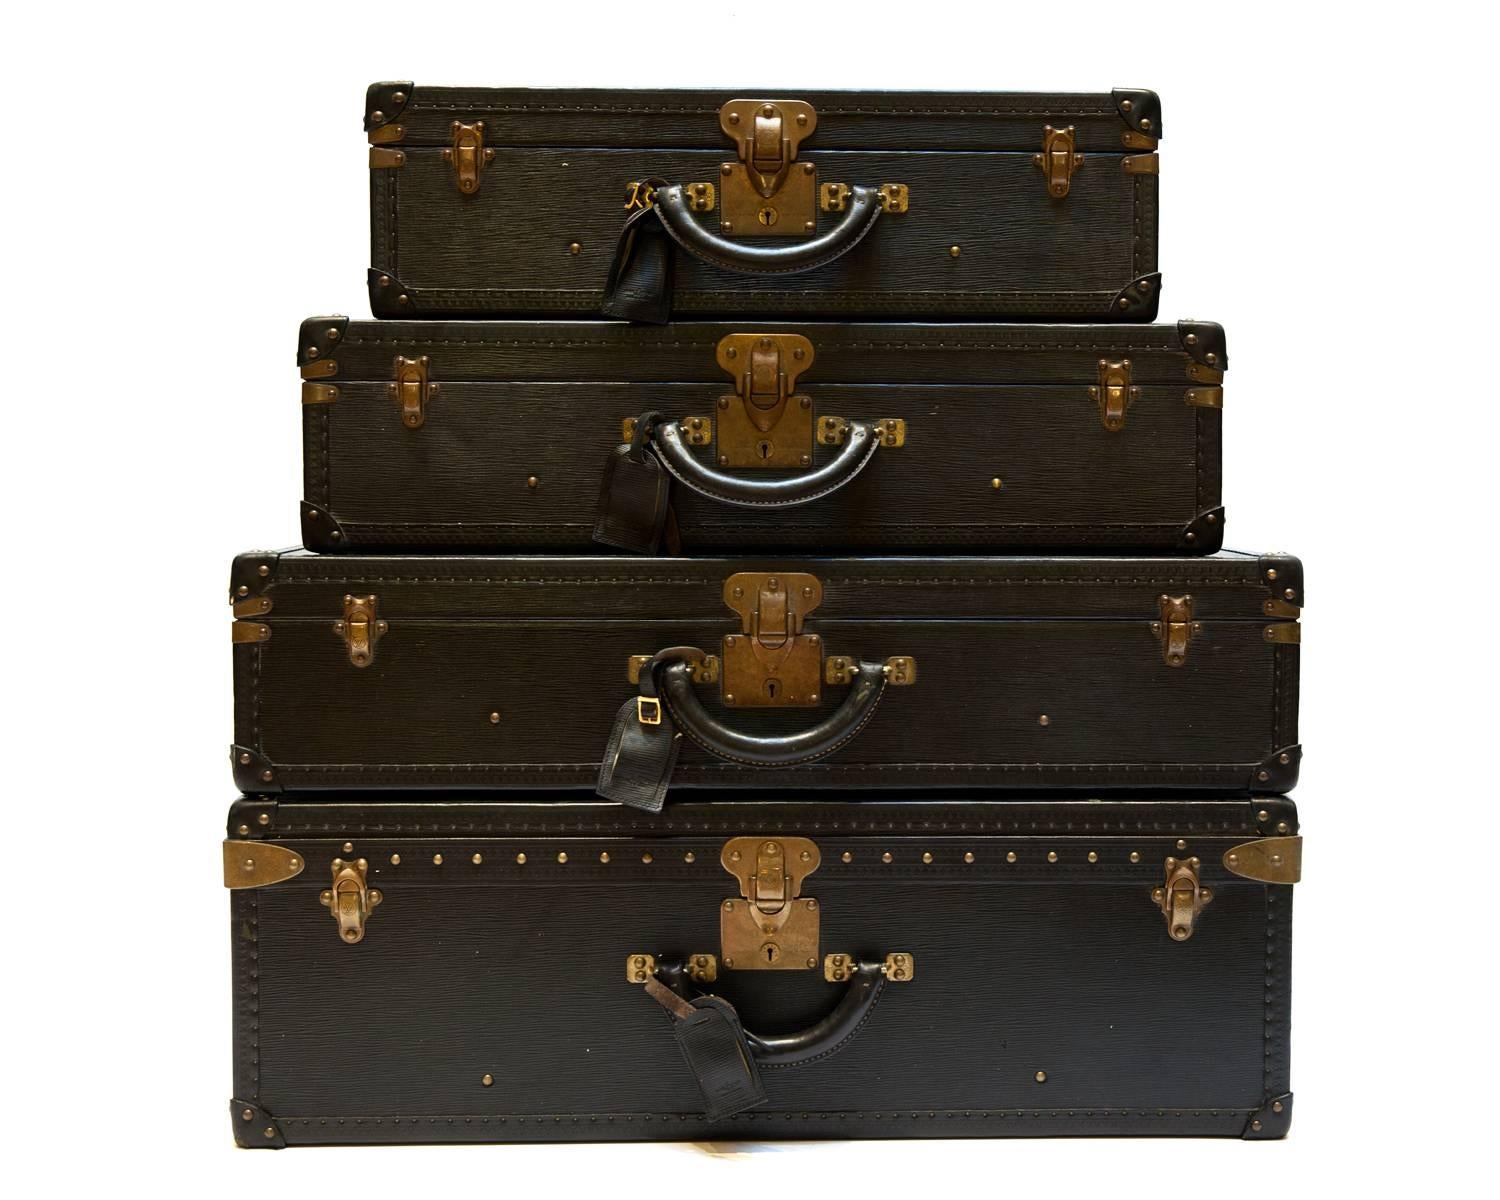 A rare set of four matching black Epi leather hard-sided luggage. 
These come from the original owner, purchased in the mid-1980s. They were never used and remained stored until now. The pieces are all numbered consecutively and come with two